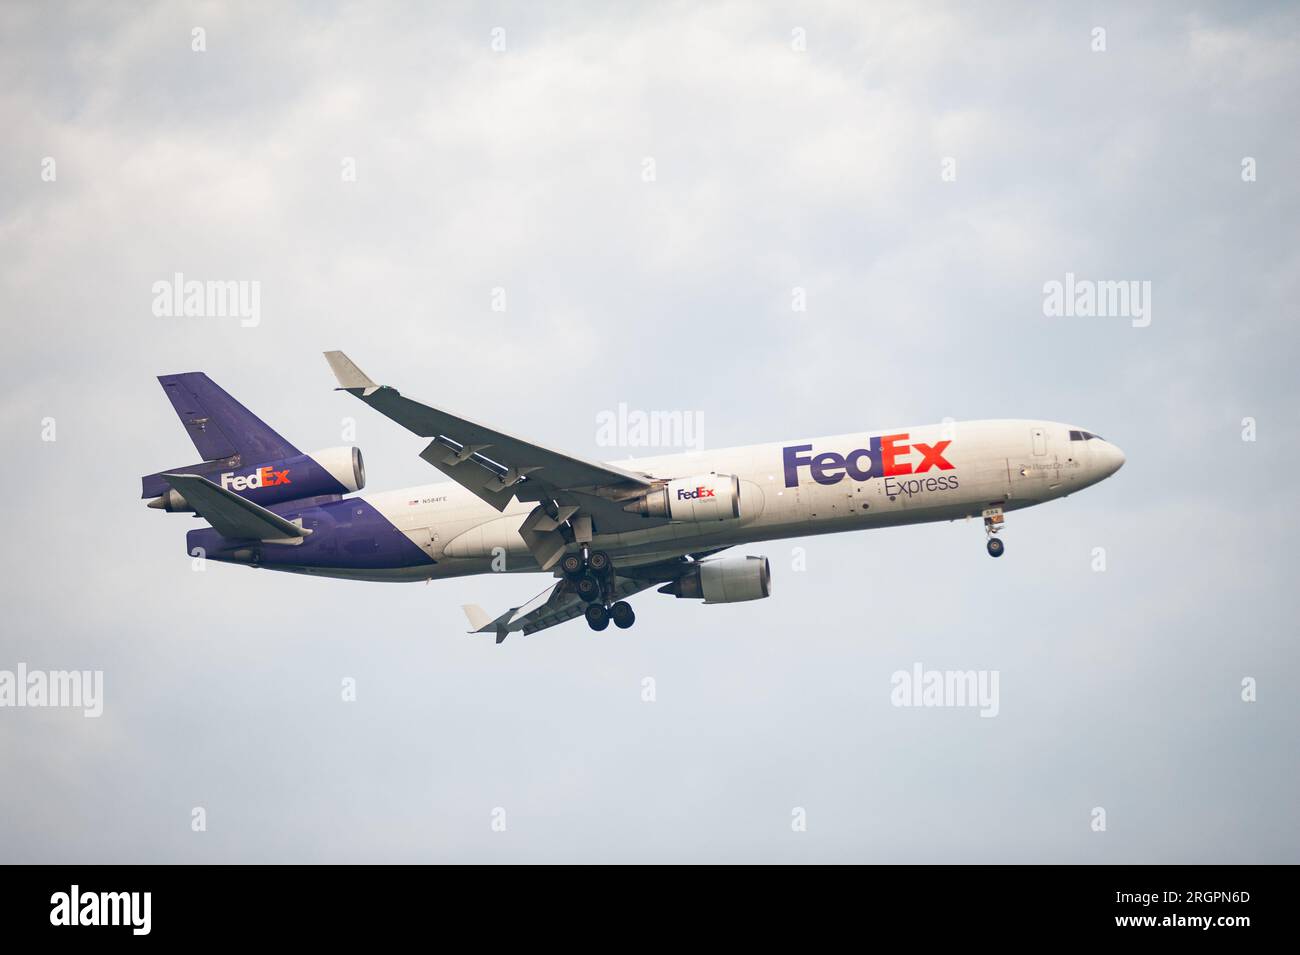 02.08.2023, Singapore, Republic of Singapore, Asia - McDonnell Douglas MD-11F freighter jet of the American airline company Federal Express (FedEx). Stock Photo